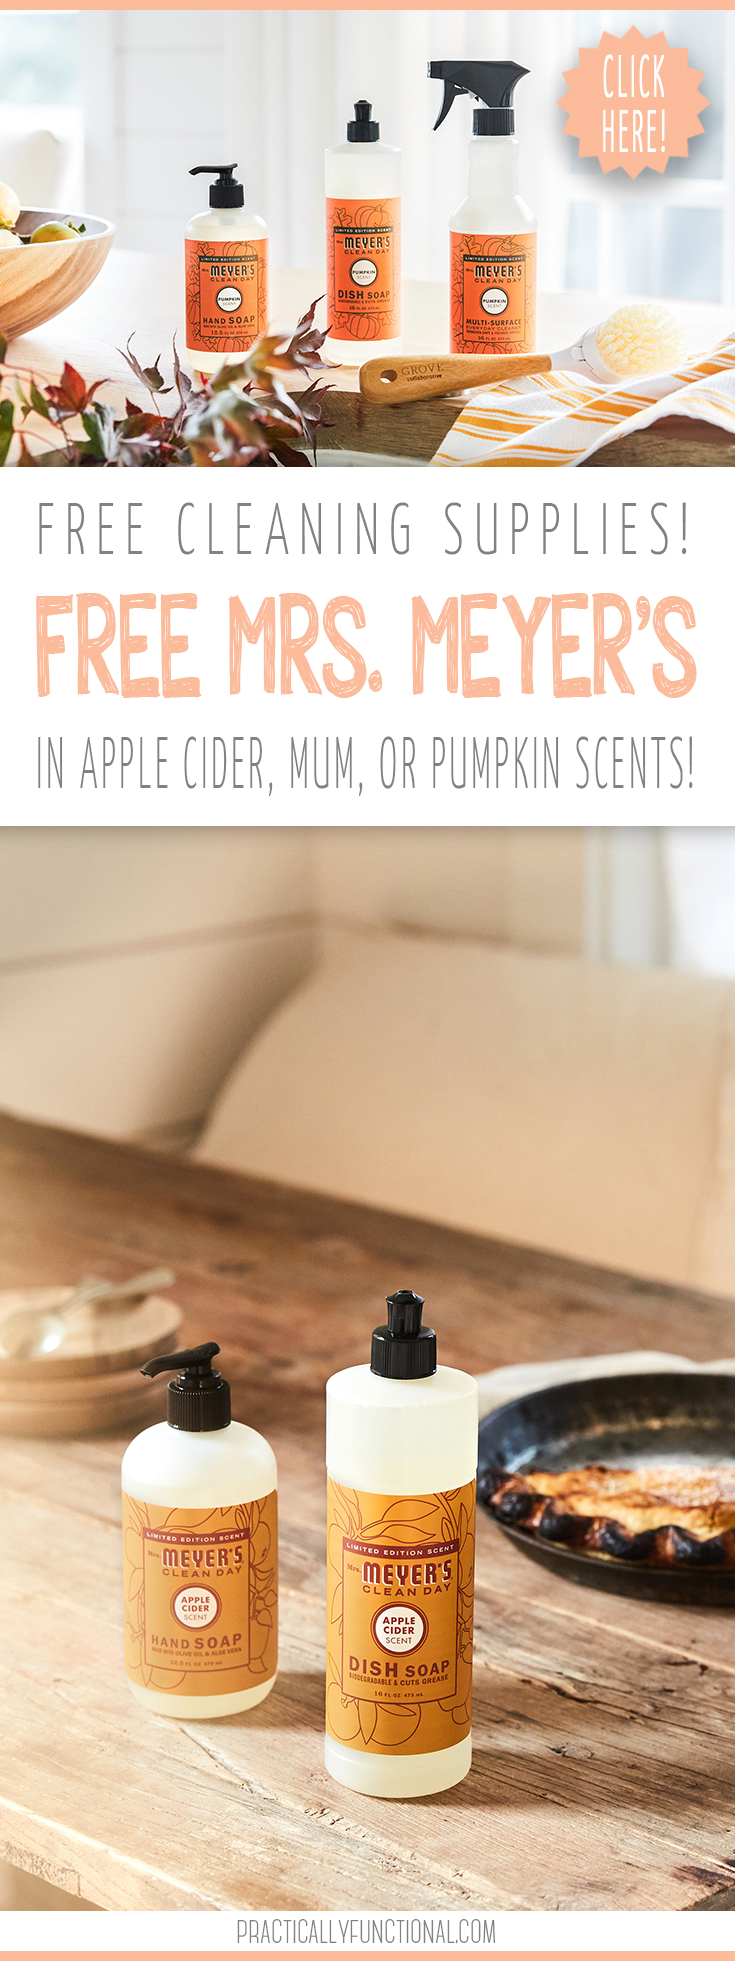 Free mrs. meyers fall scents trio and dish brush from grove collaborative practically functional pin